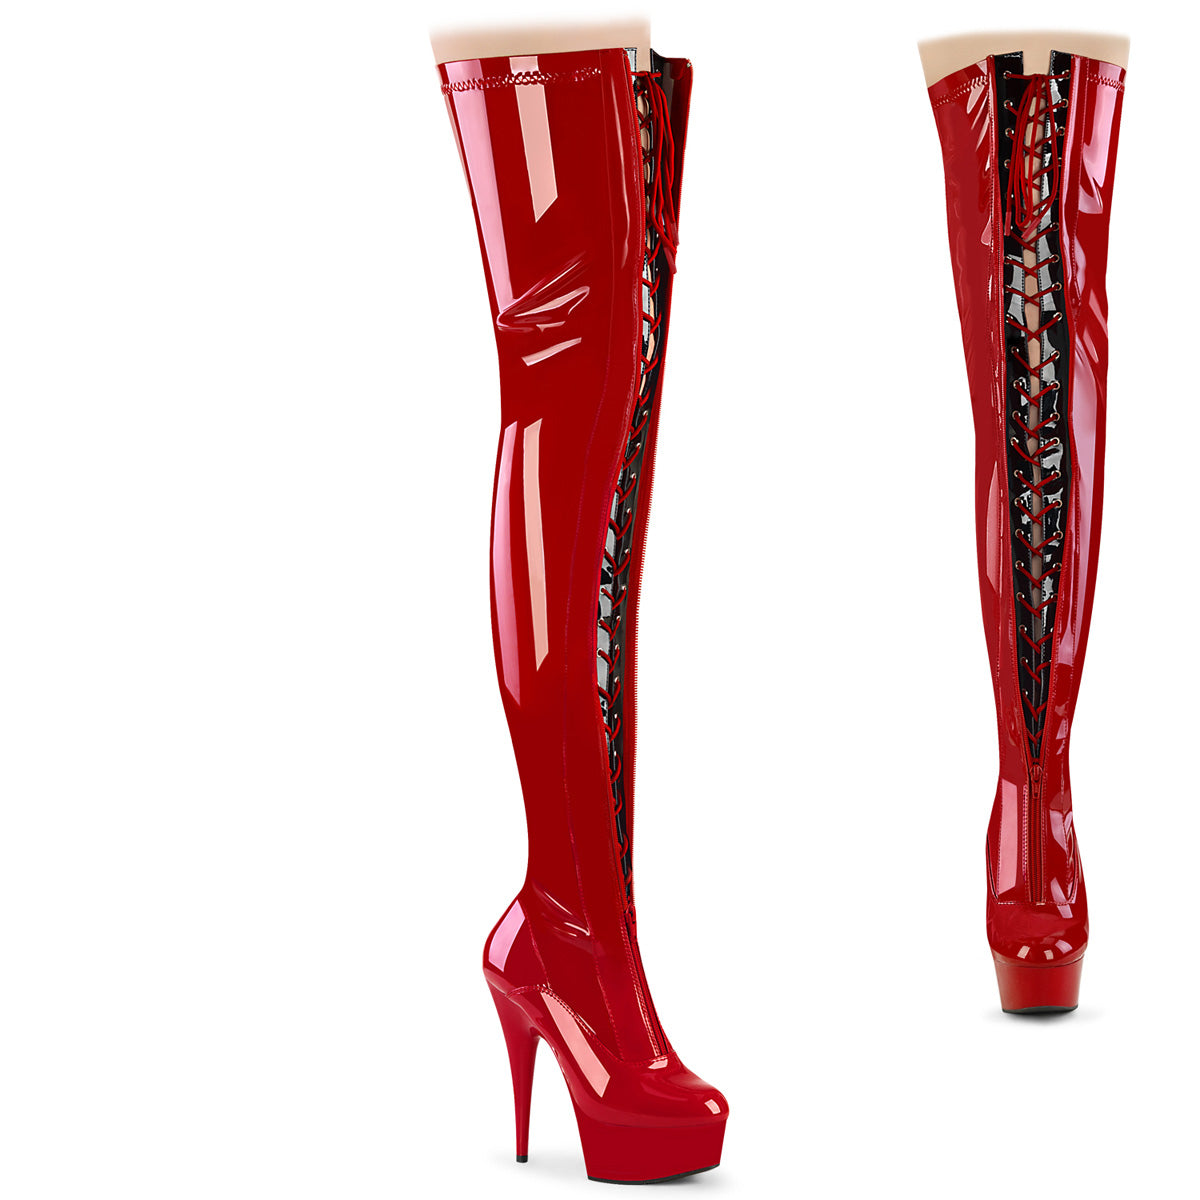 Pleaser  Boots DELIGHT-3027 Red-Blk Str. Pat/Red